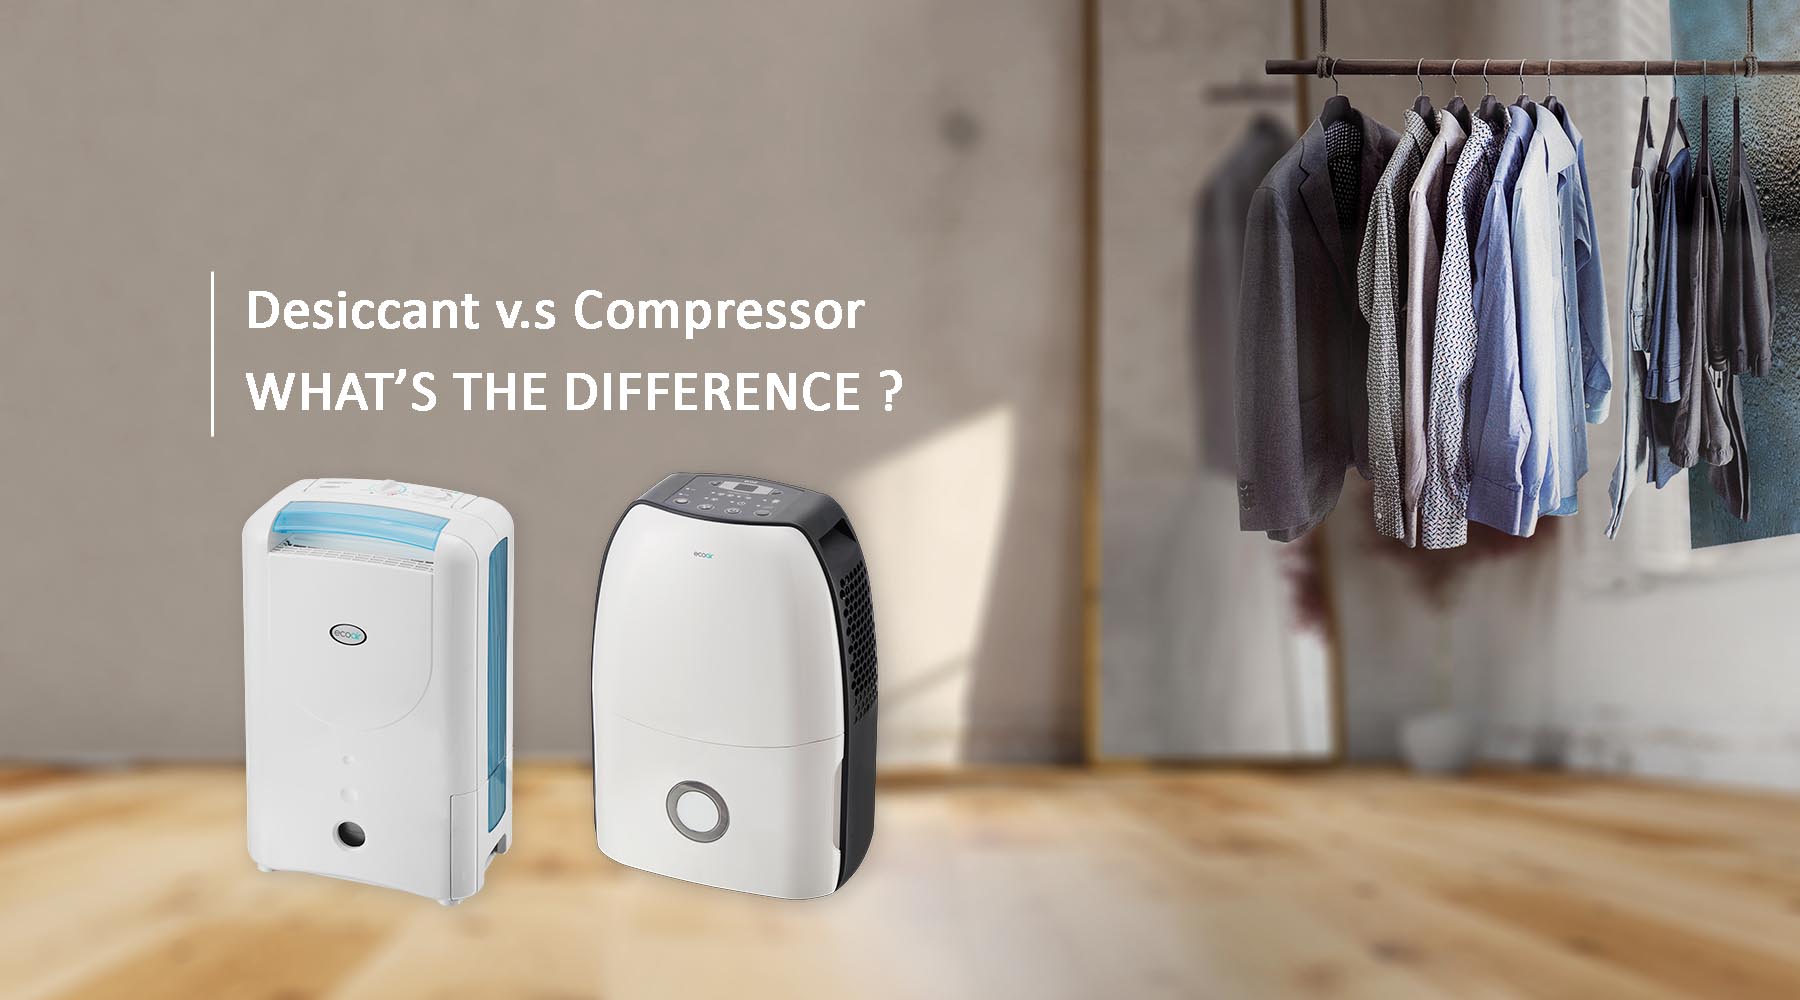 Three New Best Buy Dehumidifiers Revealed by Which? Tests